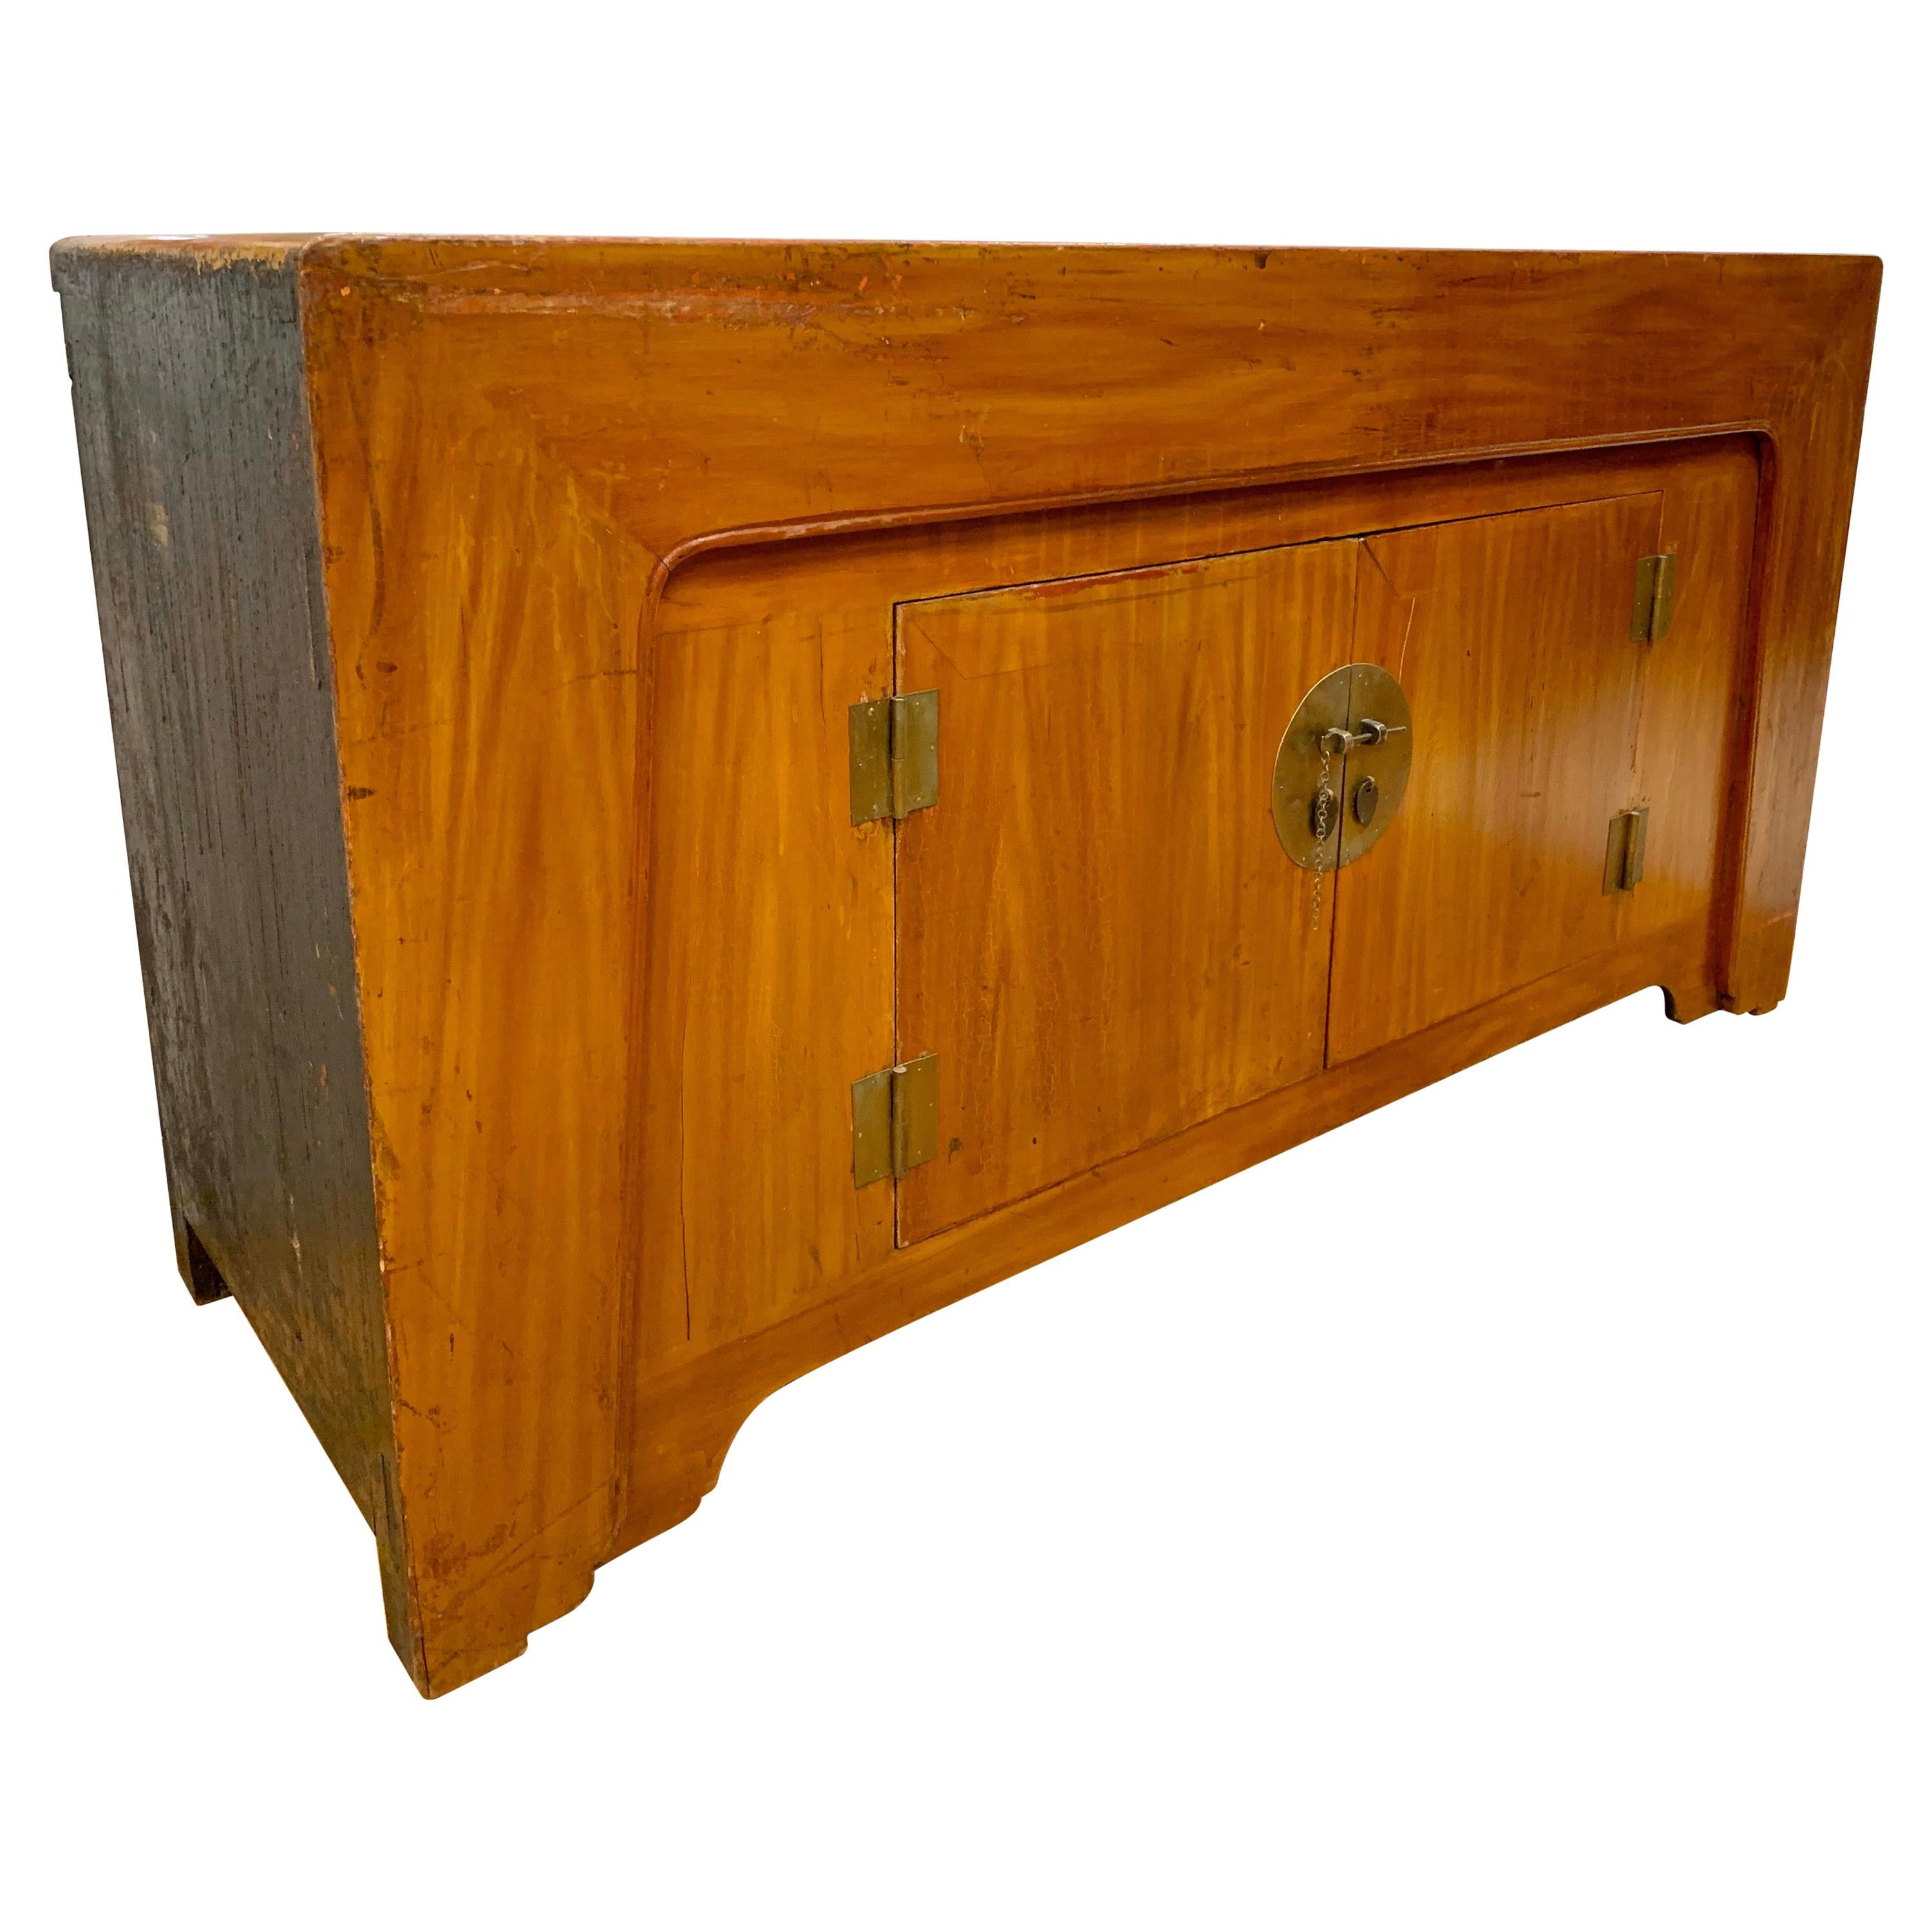 Chinese Export Late 19th Century Chinese Elmwood Credenza Sideboard Buffet Cabinet